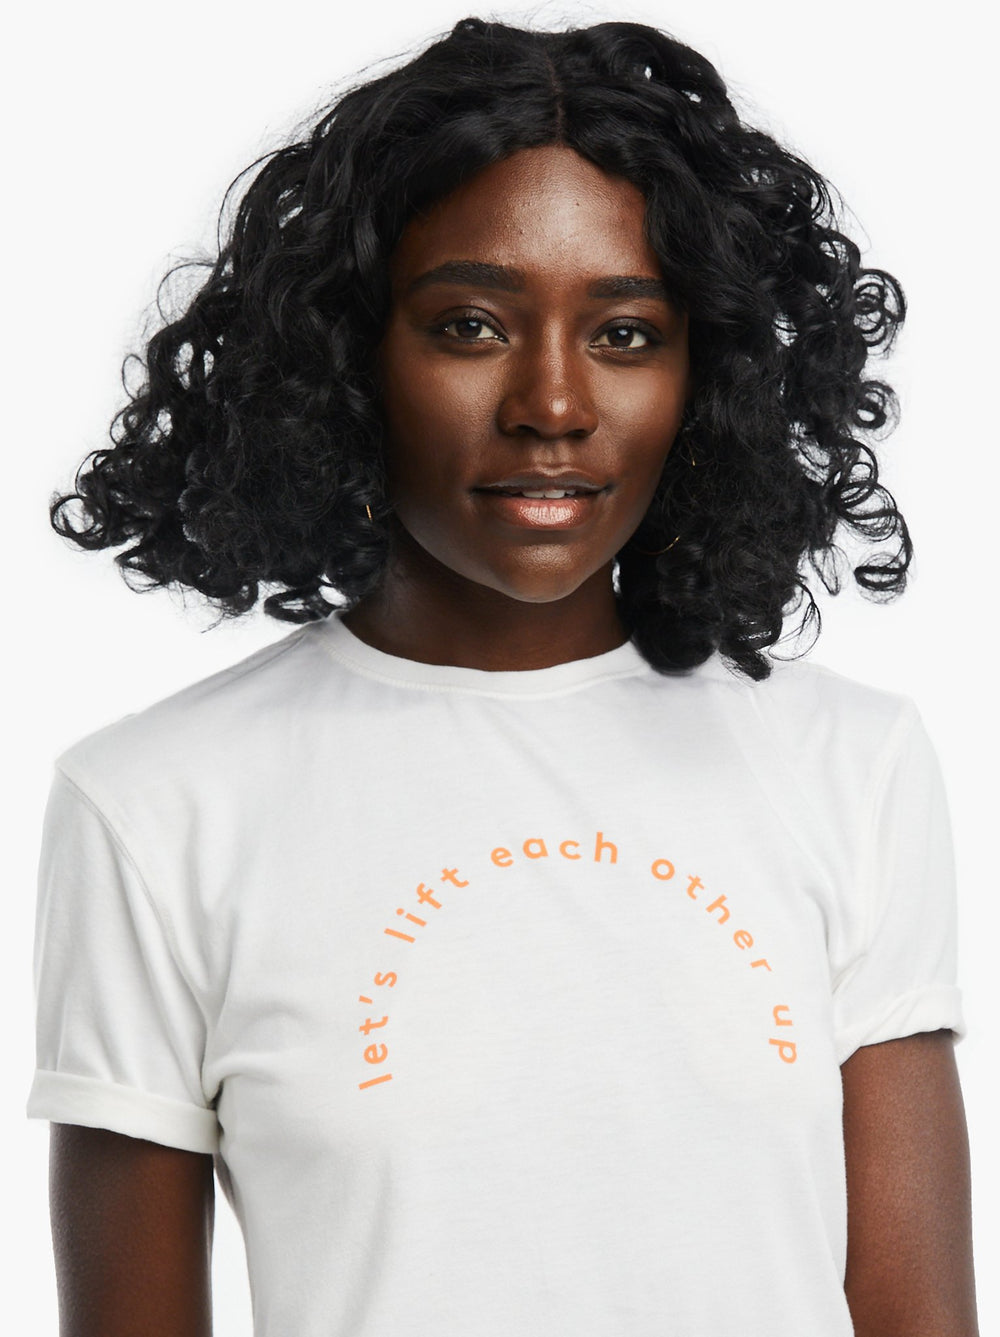 Community Collection T-Shirt: Empowered